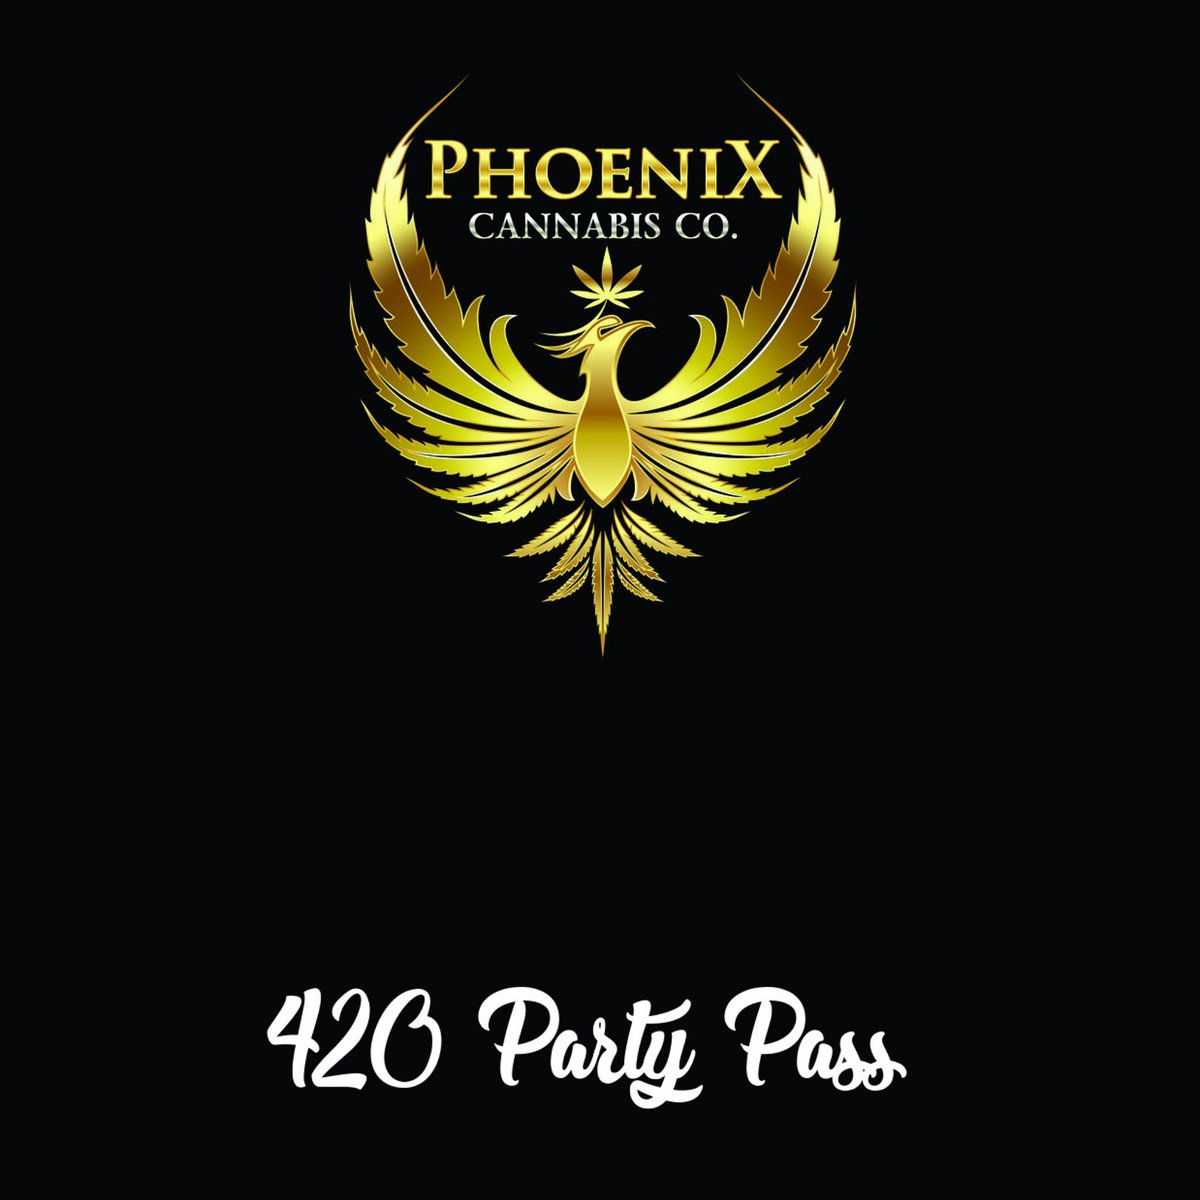 Don't miss a devilish good time this Friday #420 at the #DLLodge!!! 🤓 Partnering with @phoenixcannabisco we have one hell of a #FREE bash for you!! 😱😱 Hurry over to @phoenixcannabisco and get your LIMITED ticket before they are GONE!!! 💨💨